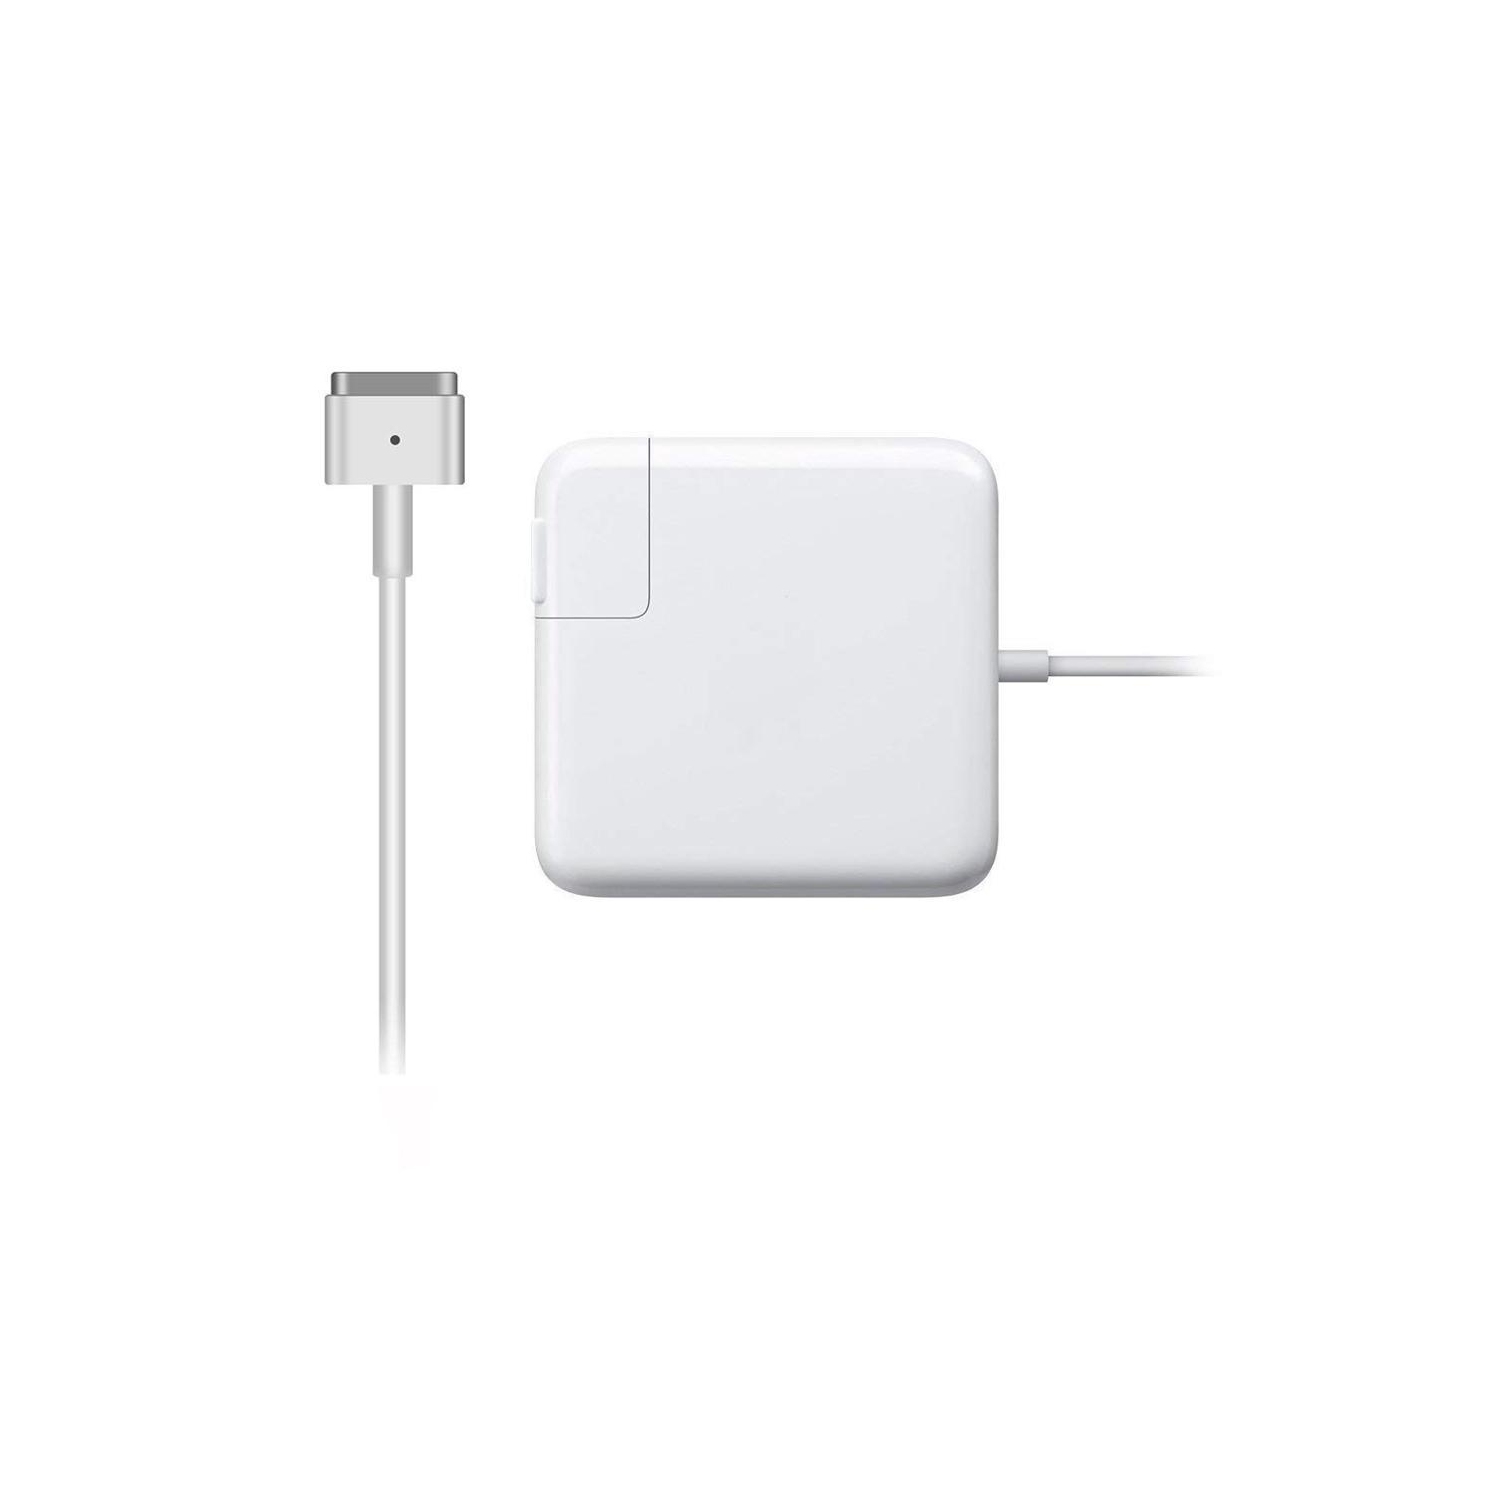 can you use non apple chargers for macbook pros